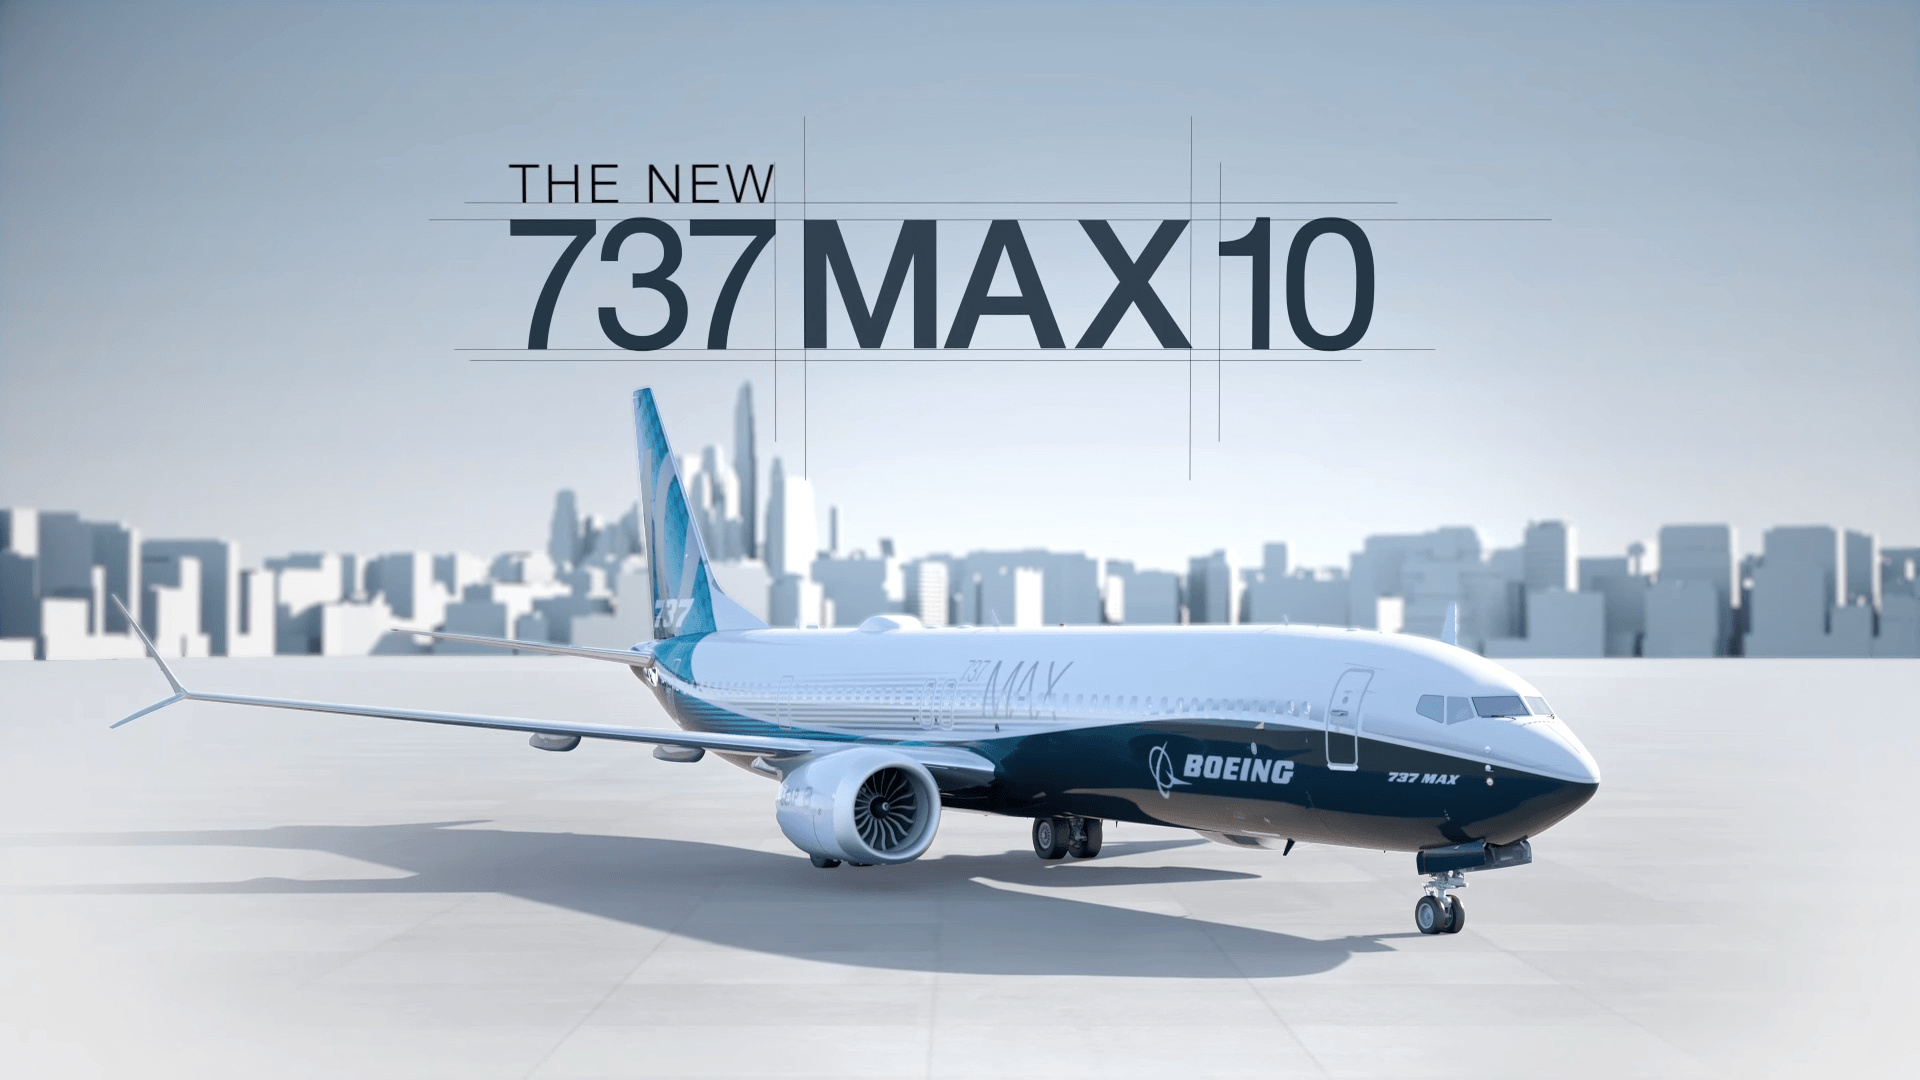 Boeing 737 Max Wallpapers - Top Free Boeing 737 Max Backgrounds 1920x1080